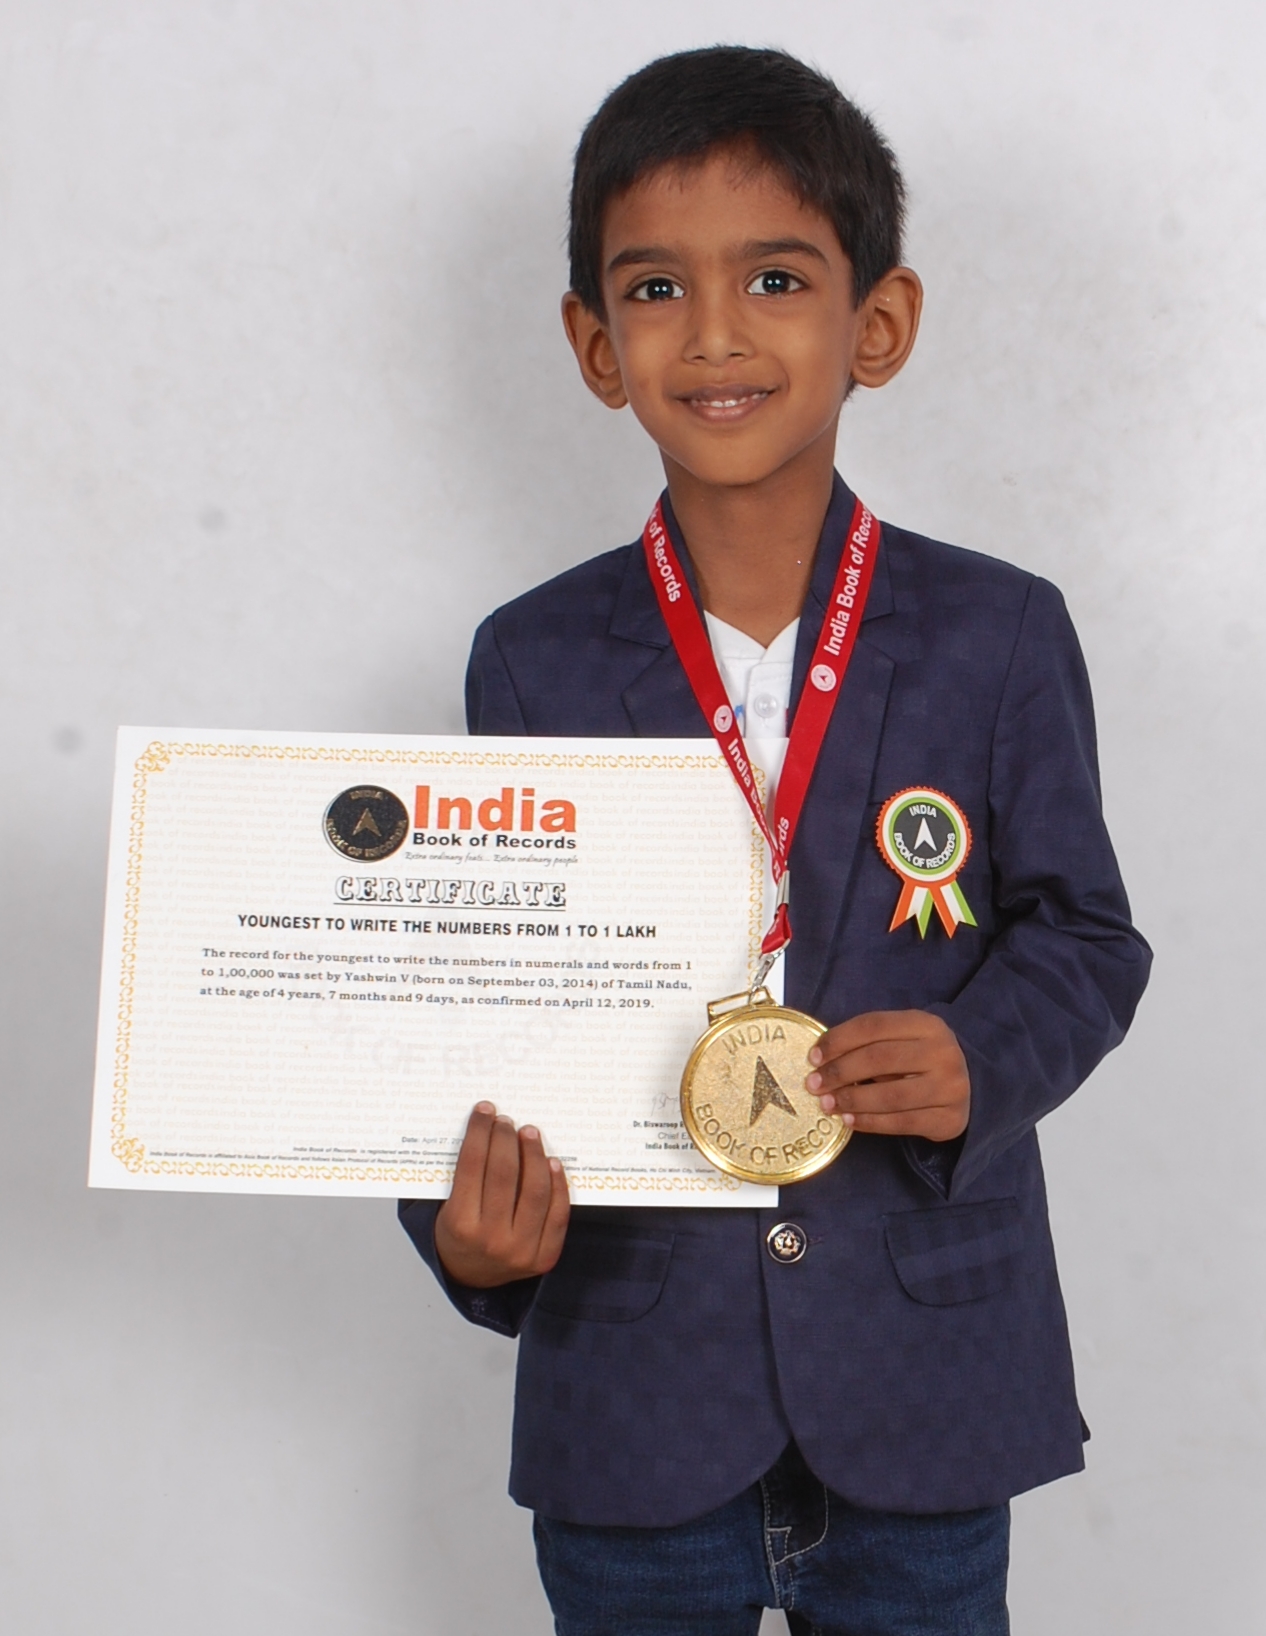 YOUNGEST TO WRITE THE NUMBERS FROM 29 TO 29 LAKH - IBR